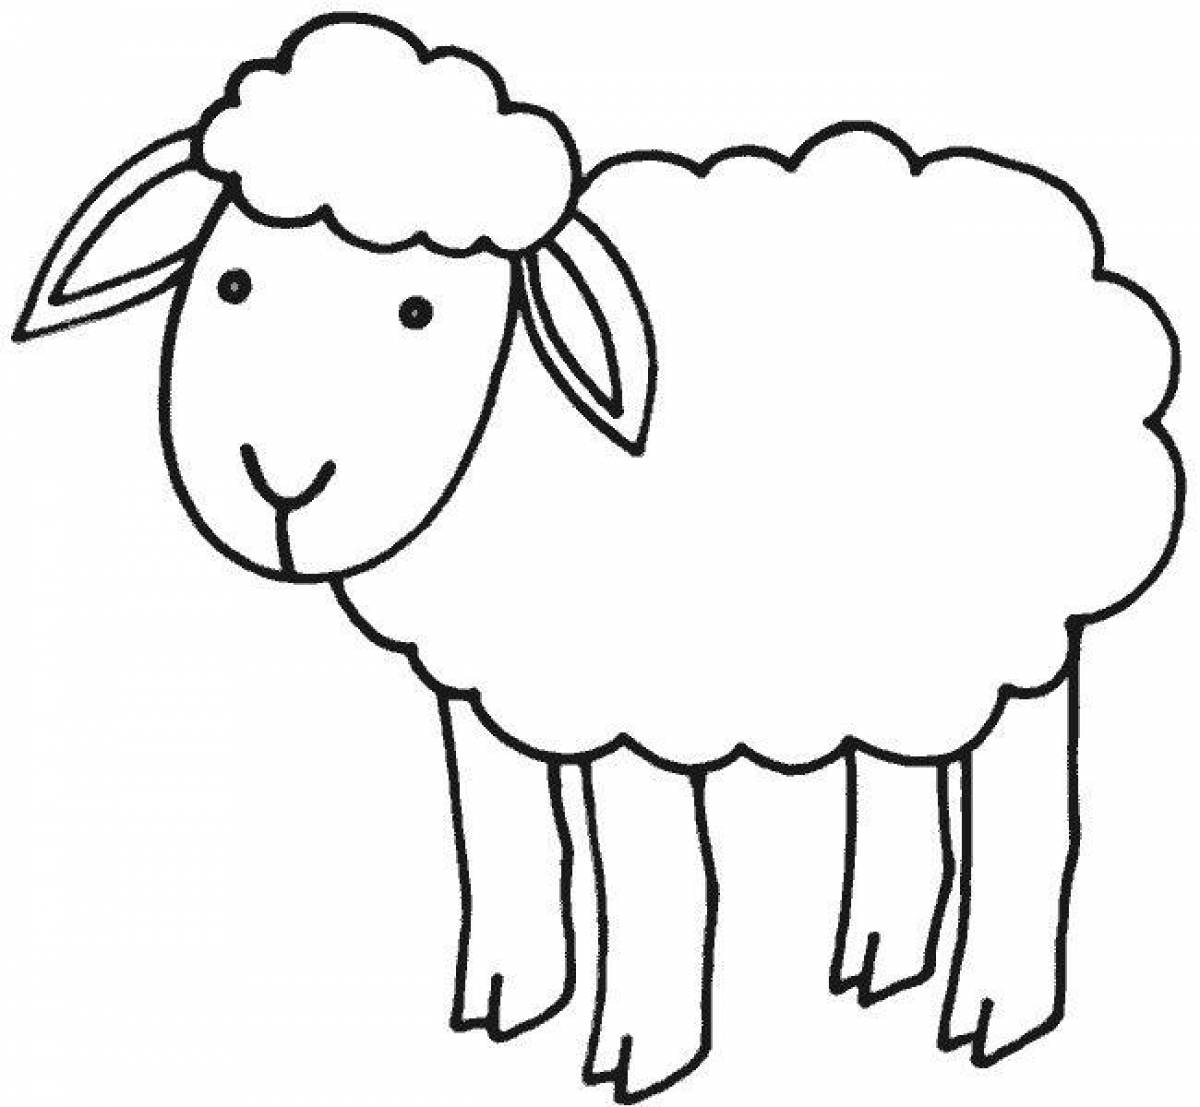 Exquisite sheep coloring for kids